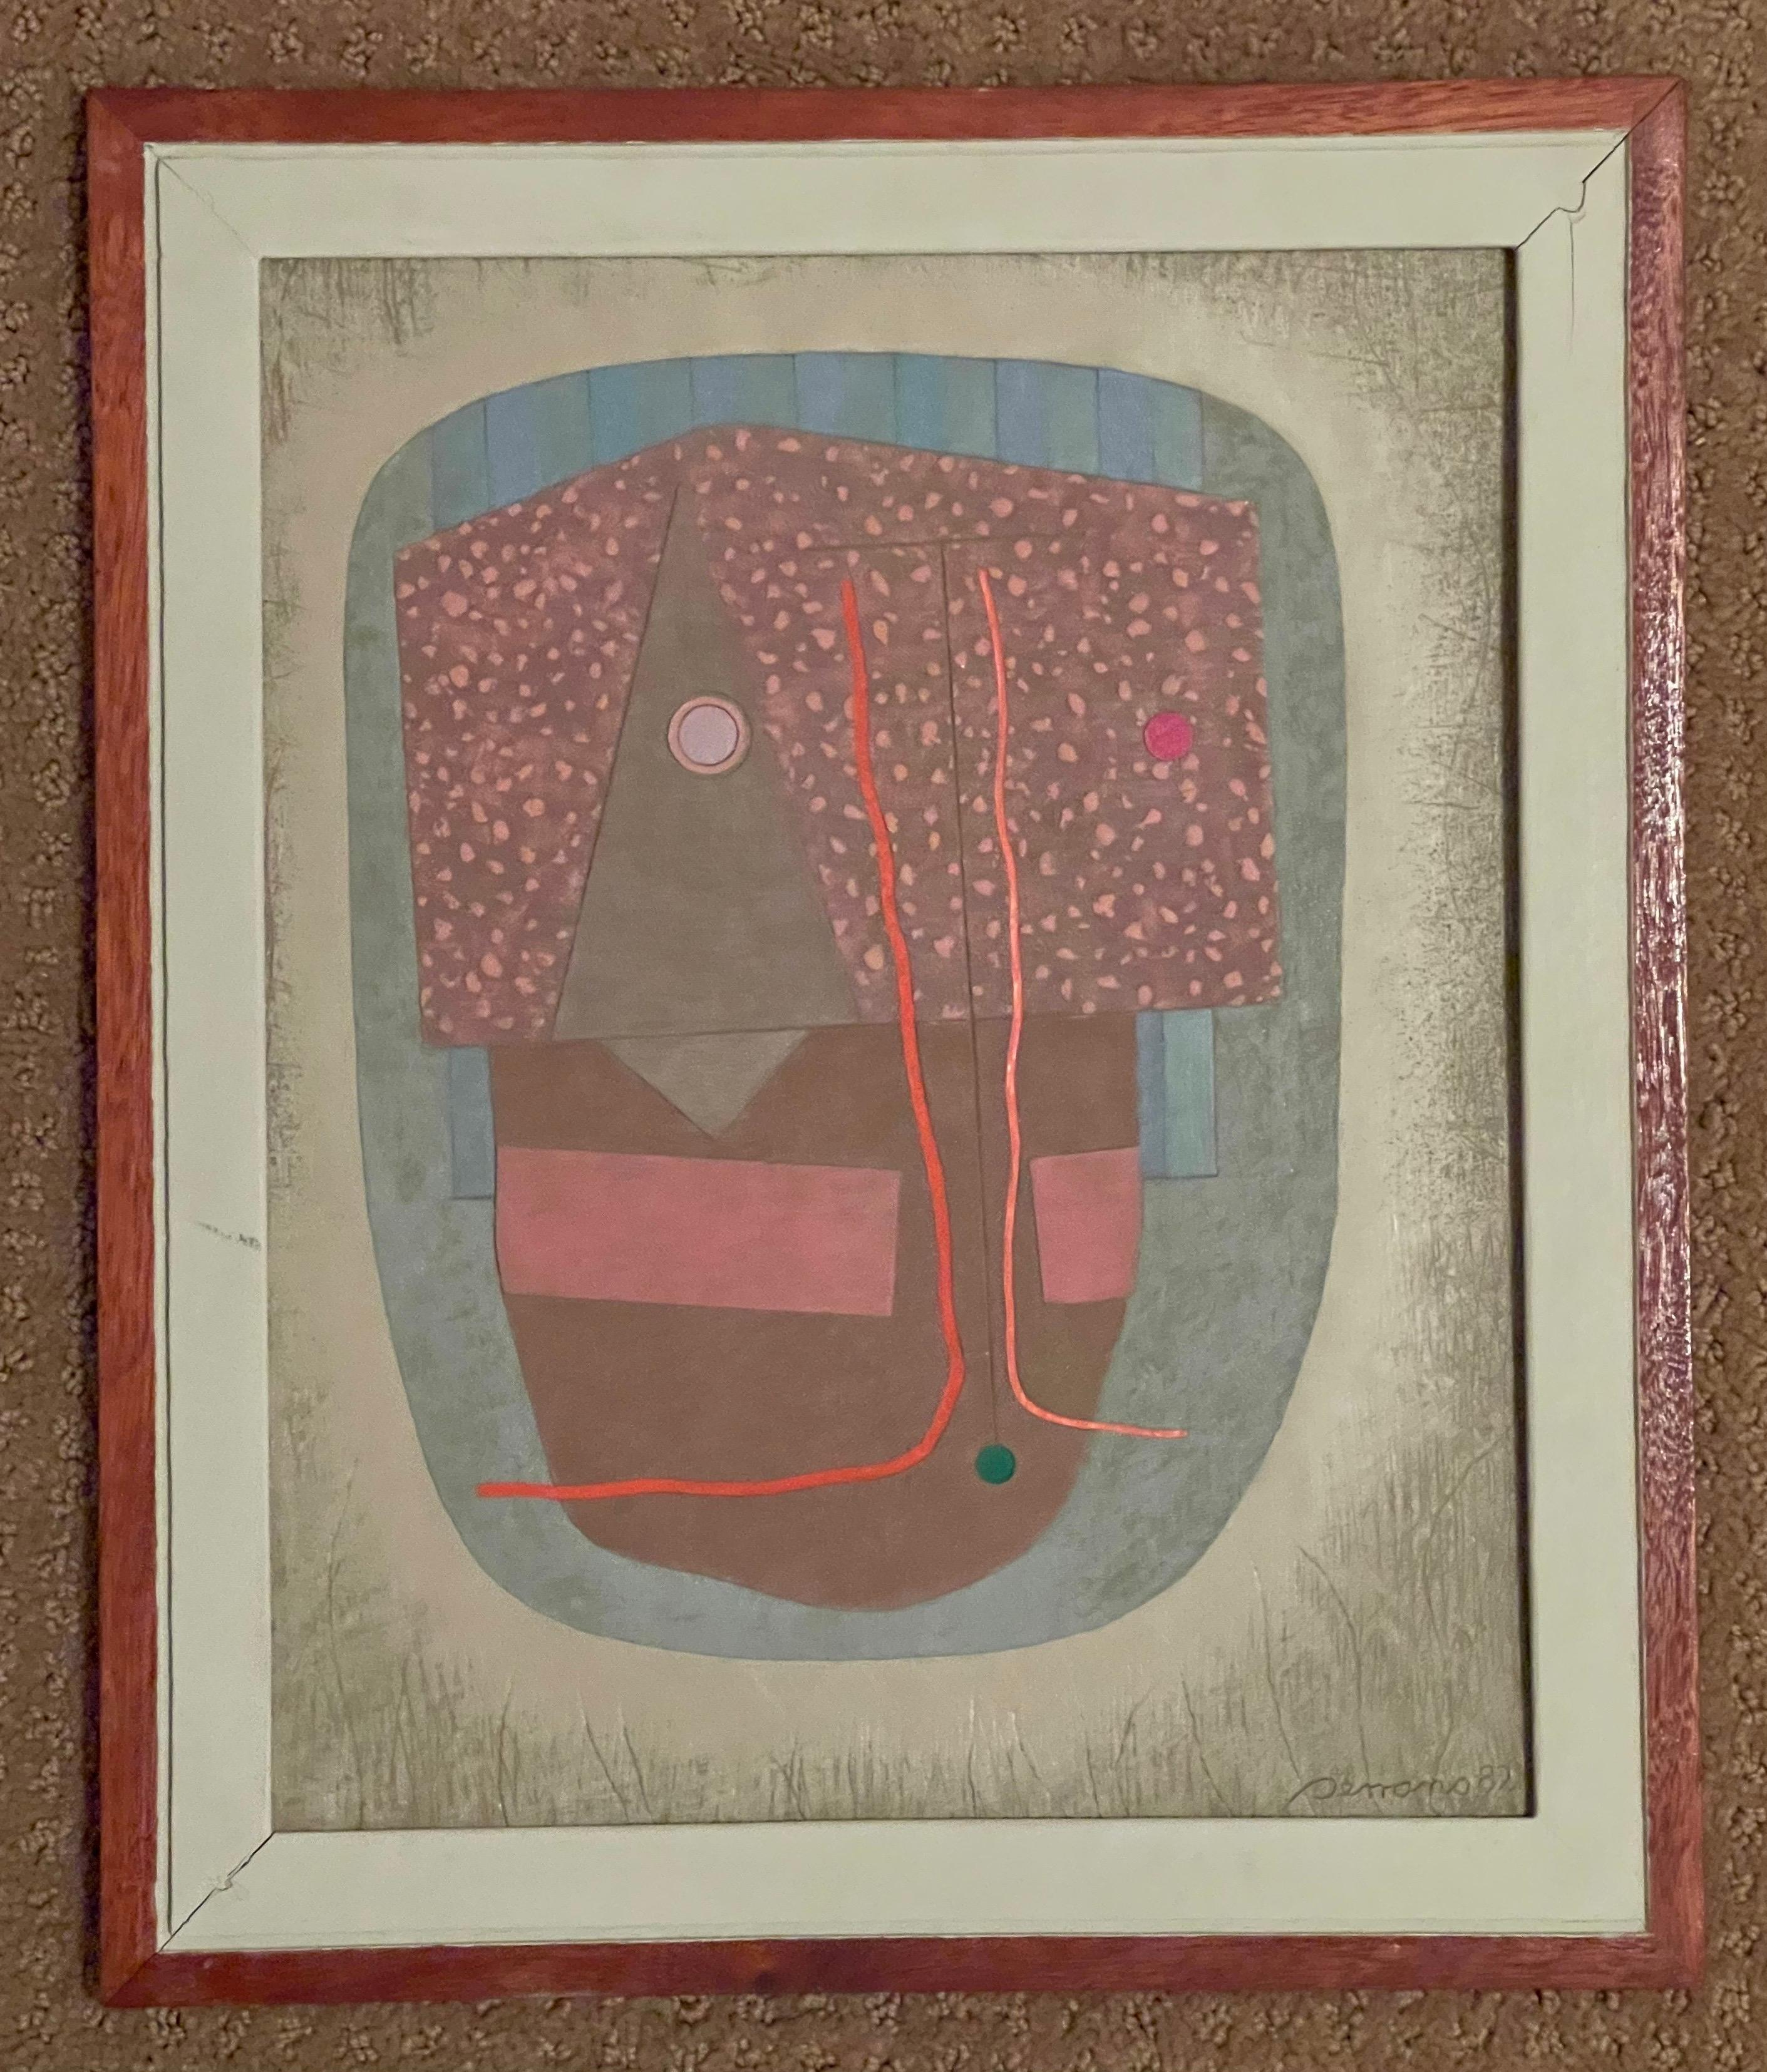 Post Modern mixed media three dimensional abstract by listed Mexican artist Jose Luis Serrano, circa 1982. Framed and mounted on board measuring 13.75